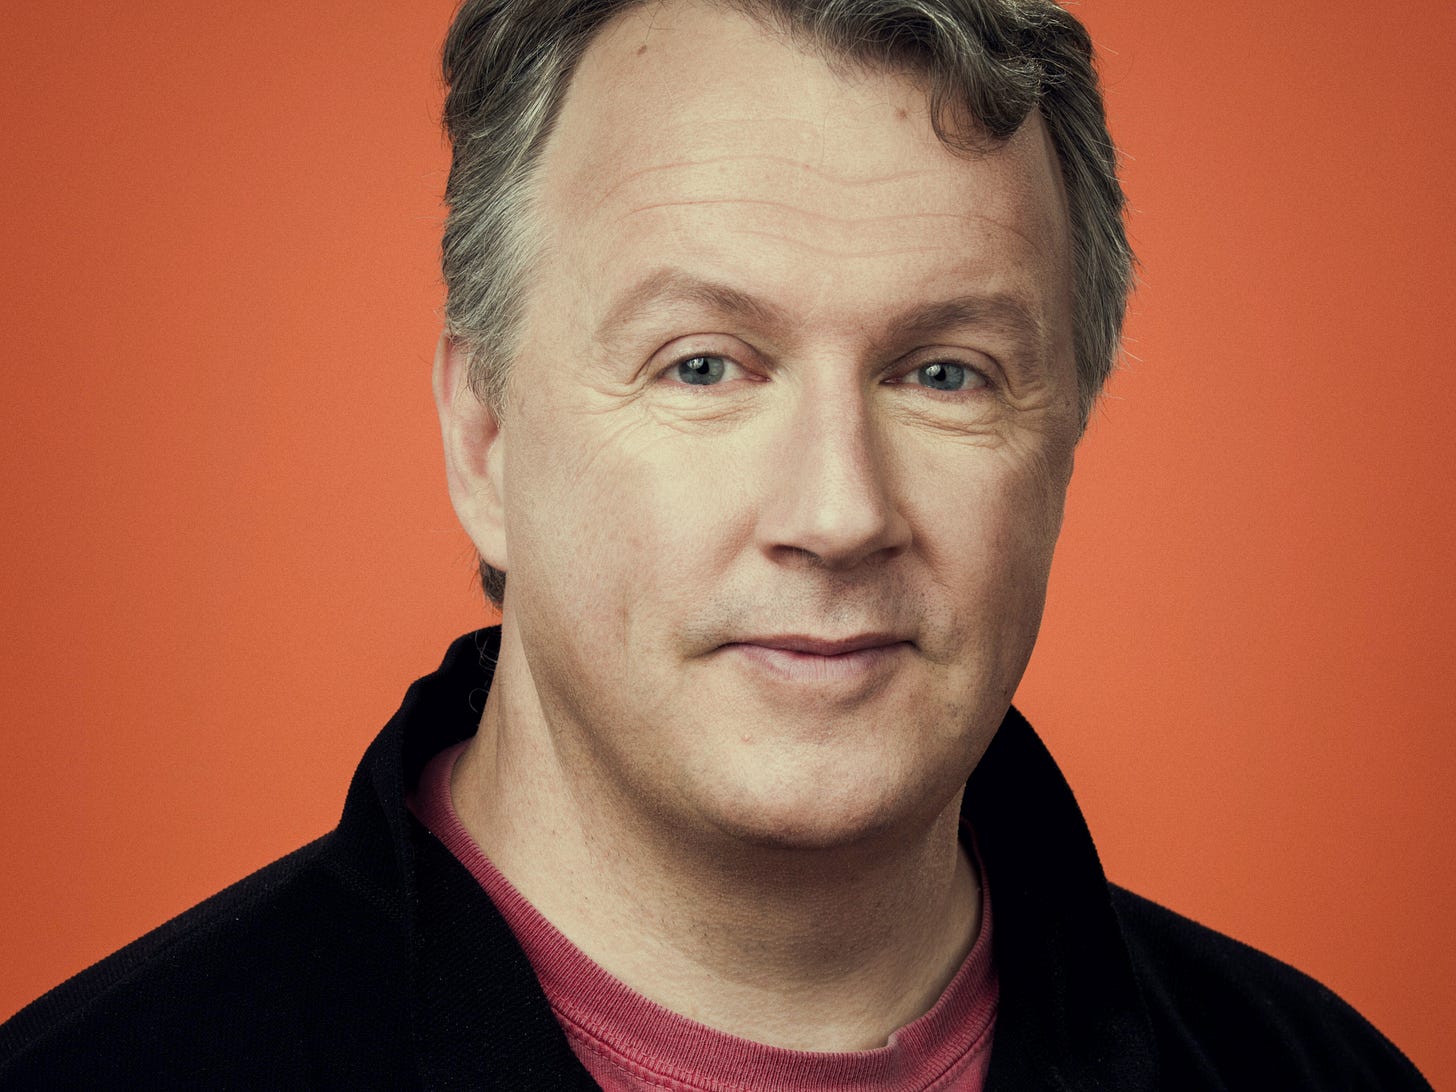 5 reasons to start a company in a recession according to Paul Graham ...